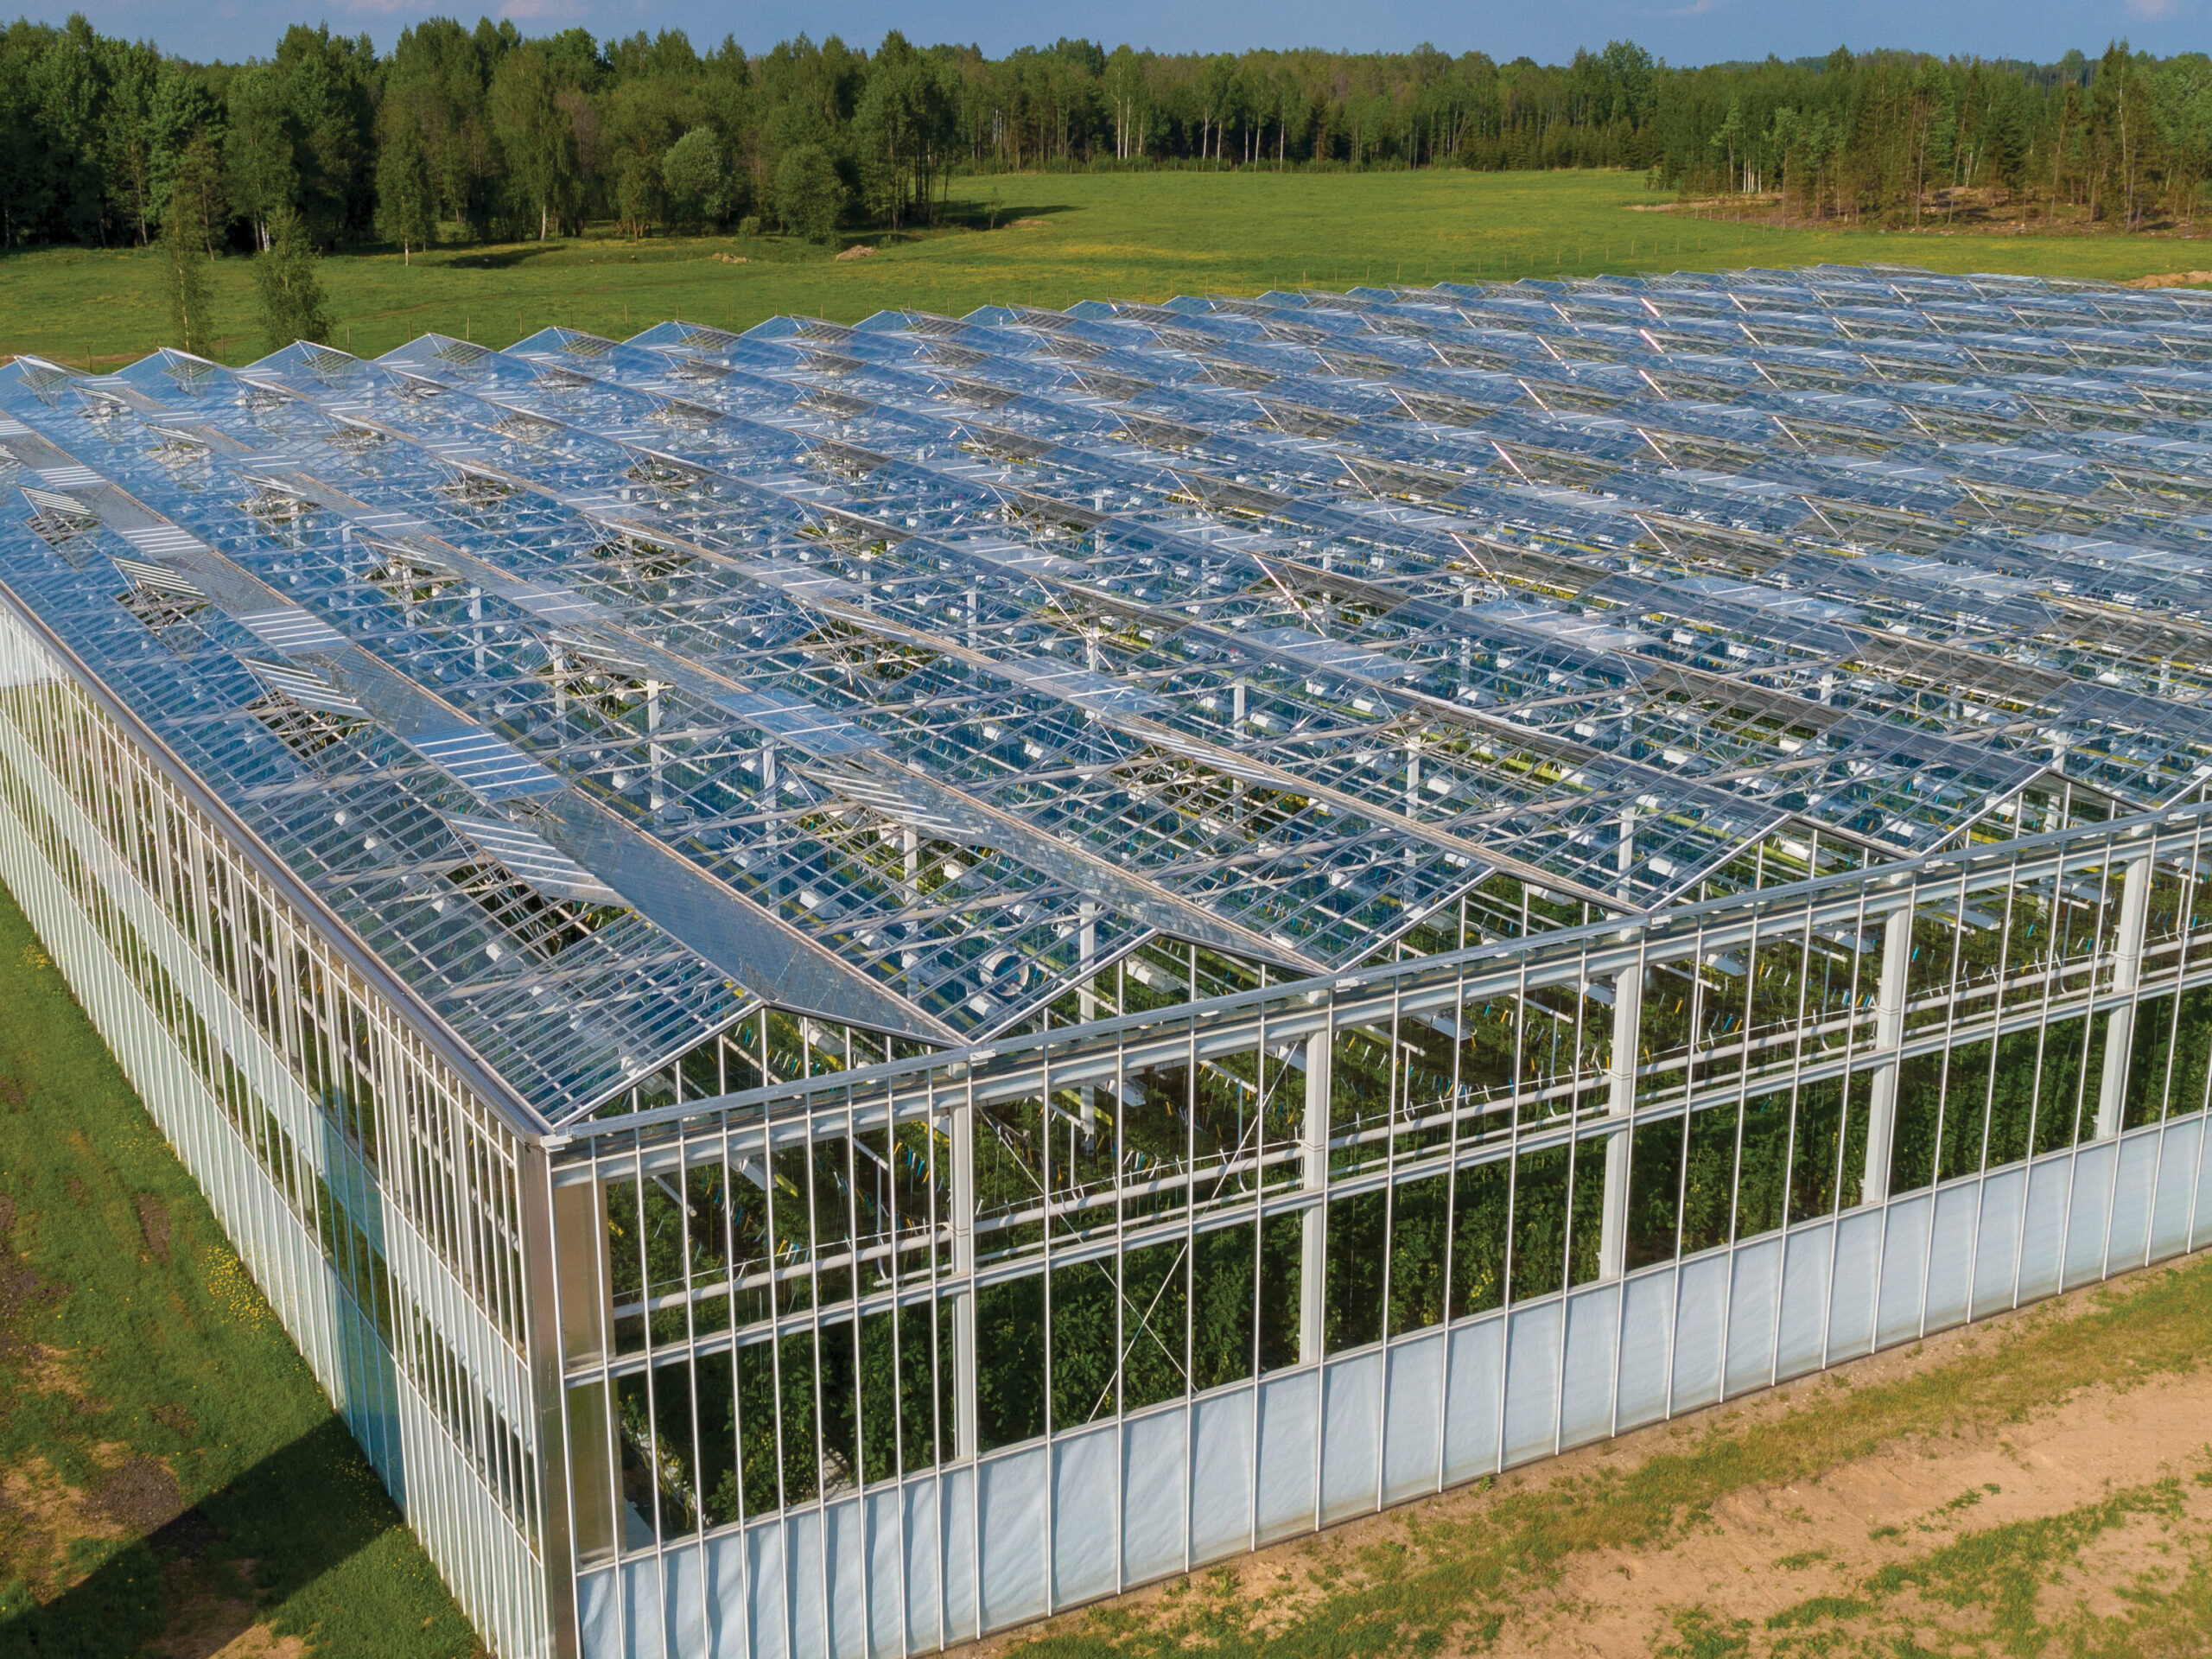 venlo structure used for greenhouse farming